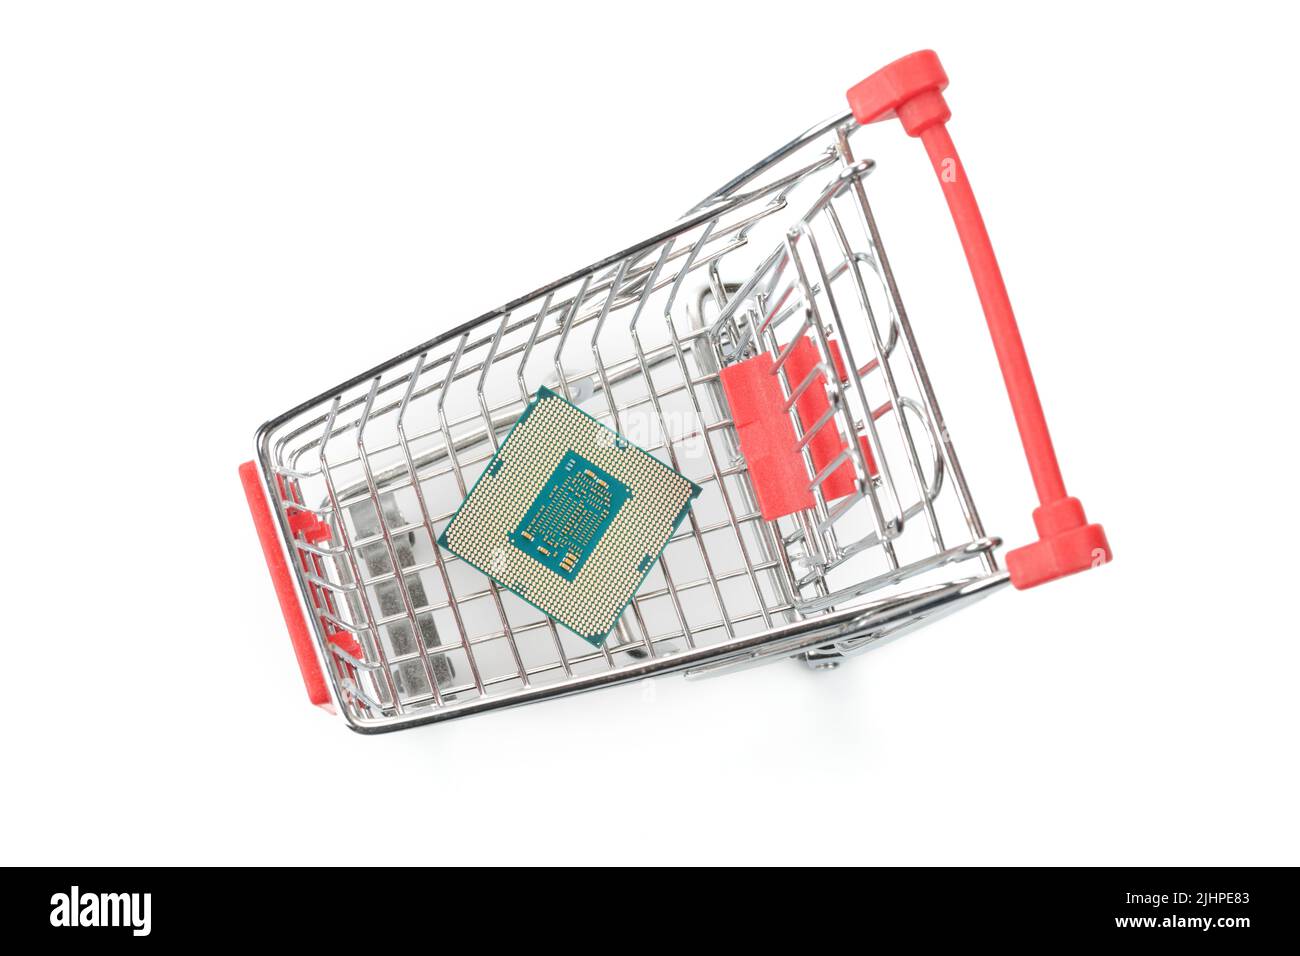 Toy shopping cart with computer part (CPU). Top view isolated on white Stock Photo